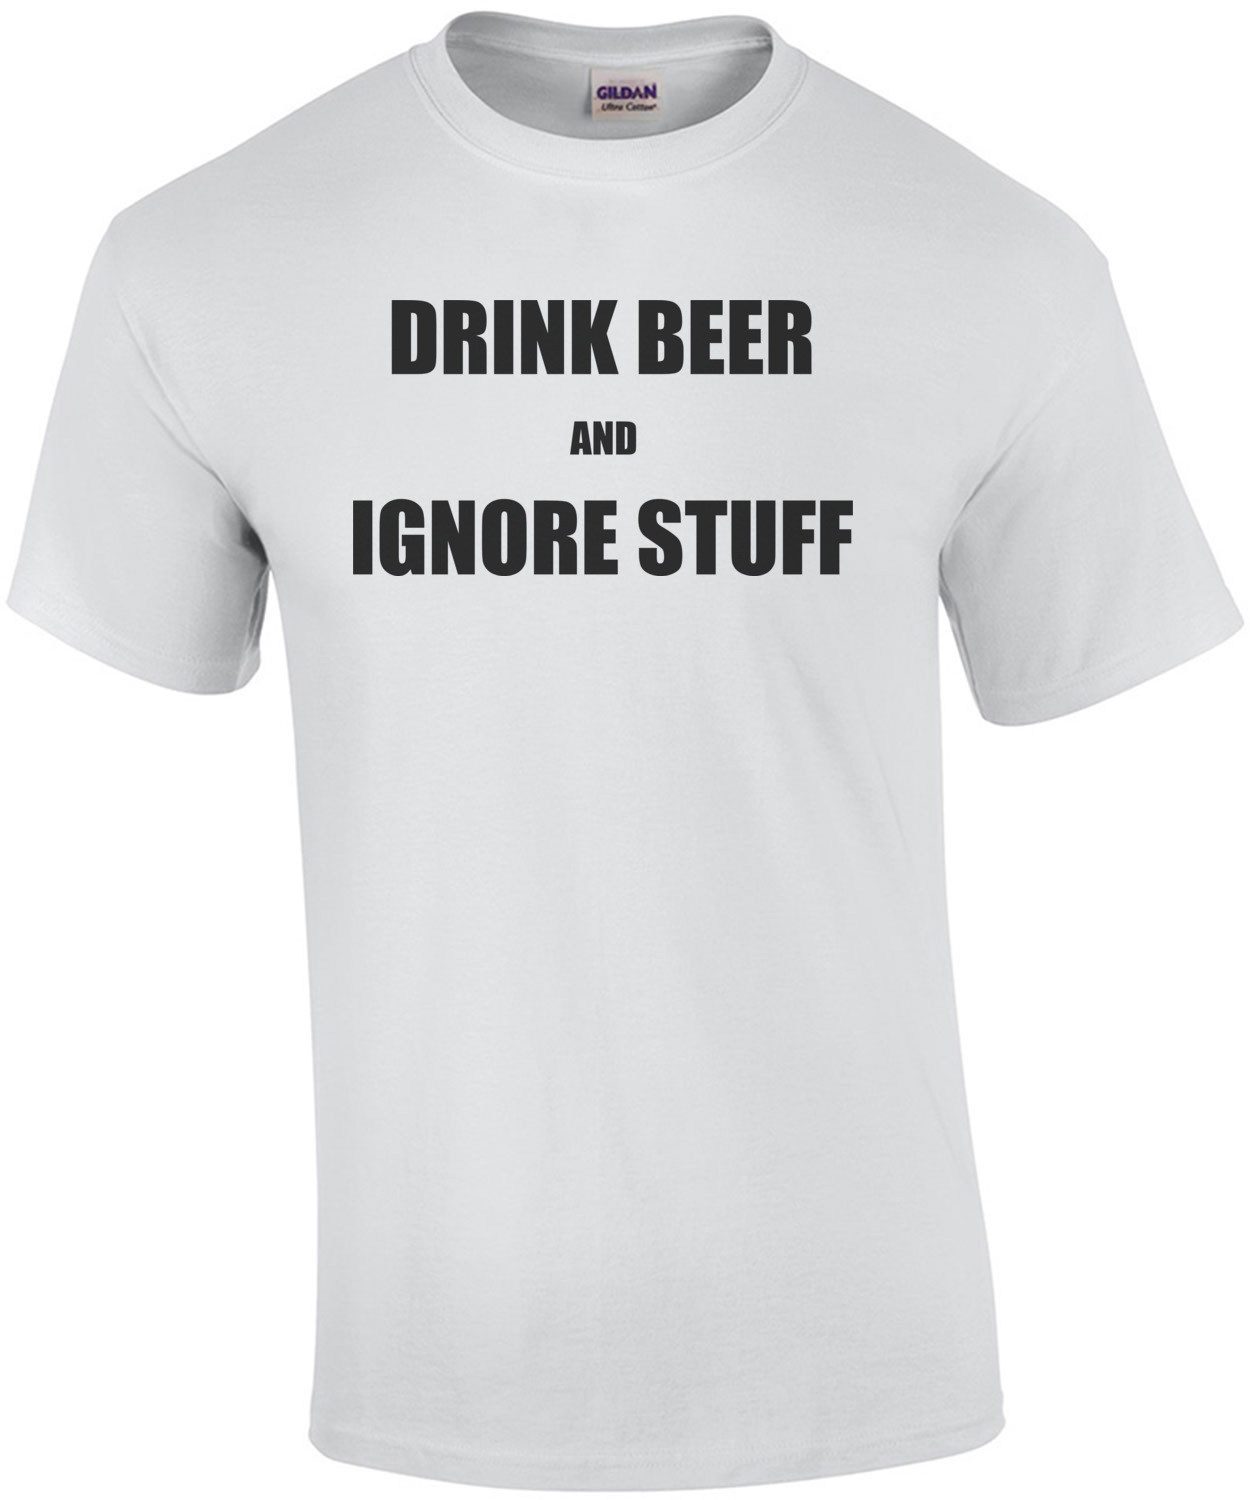 Drink Beer and Ignore Stuff Drinking